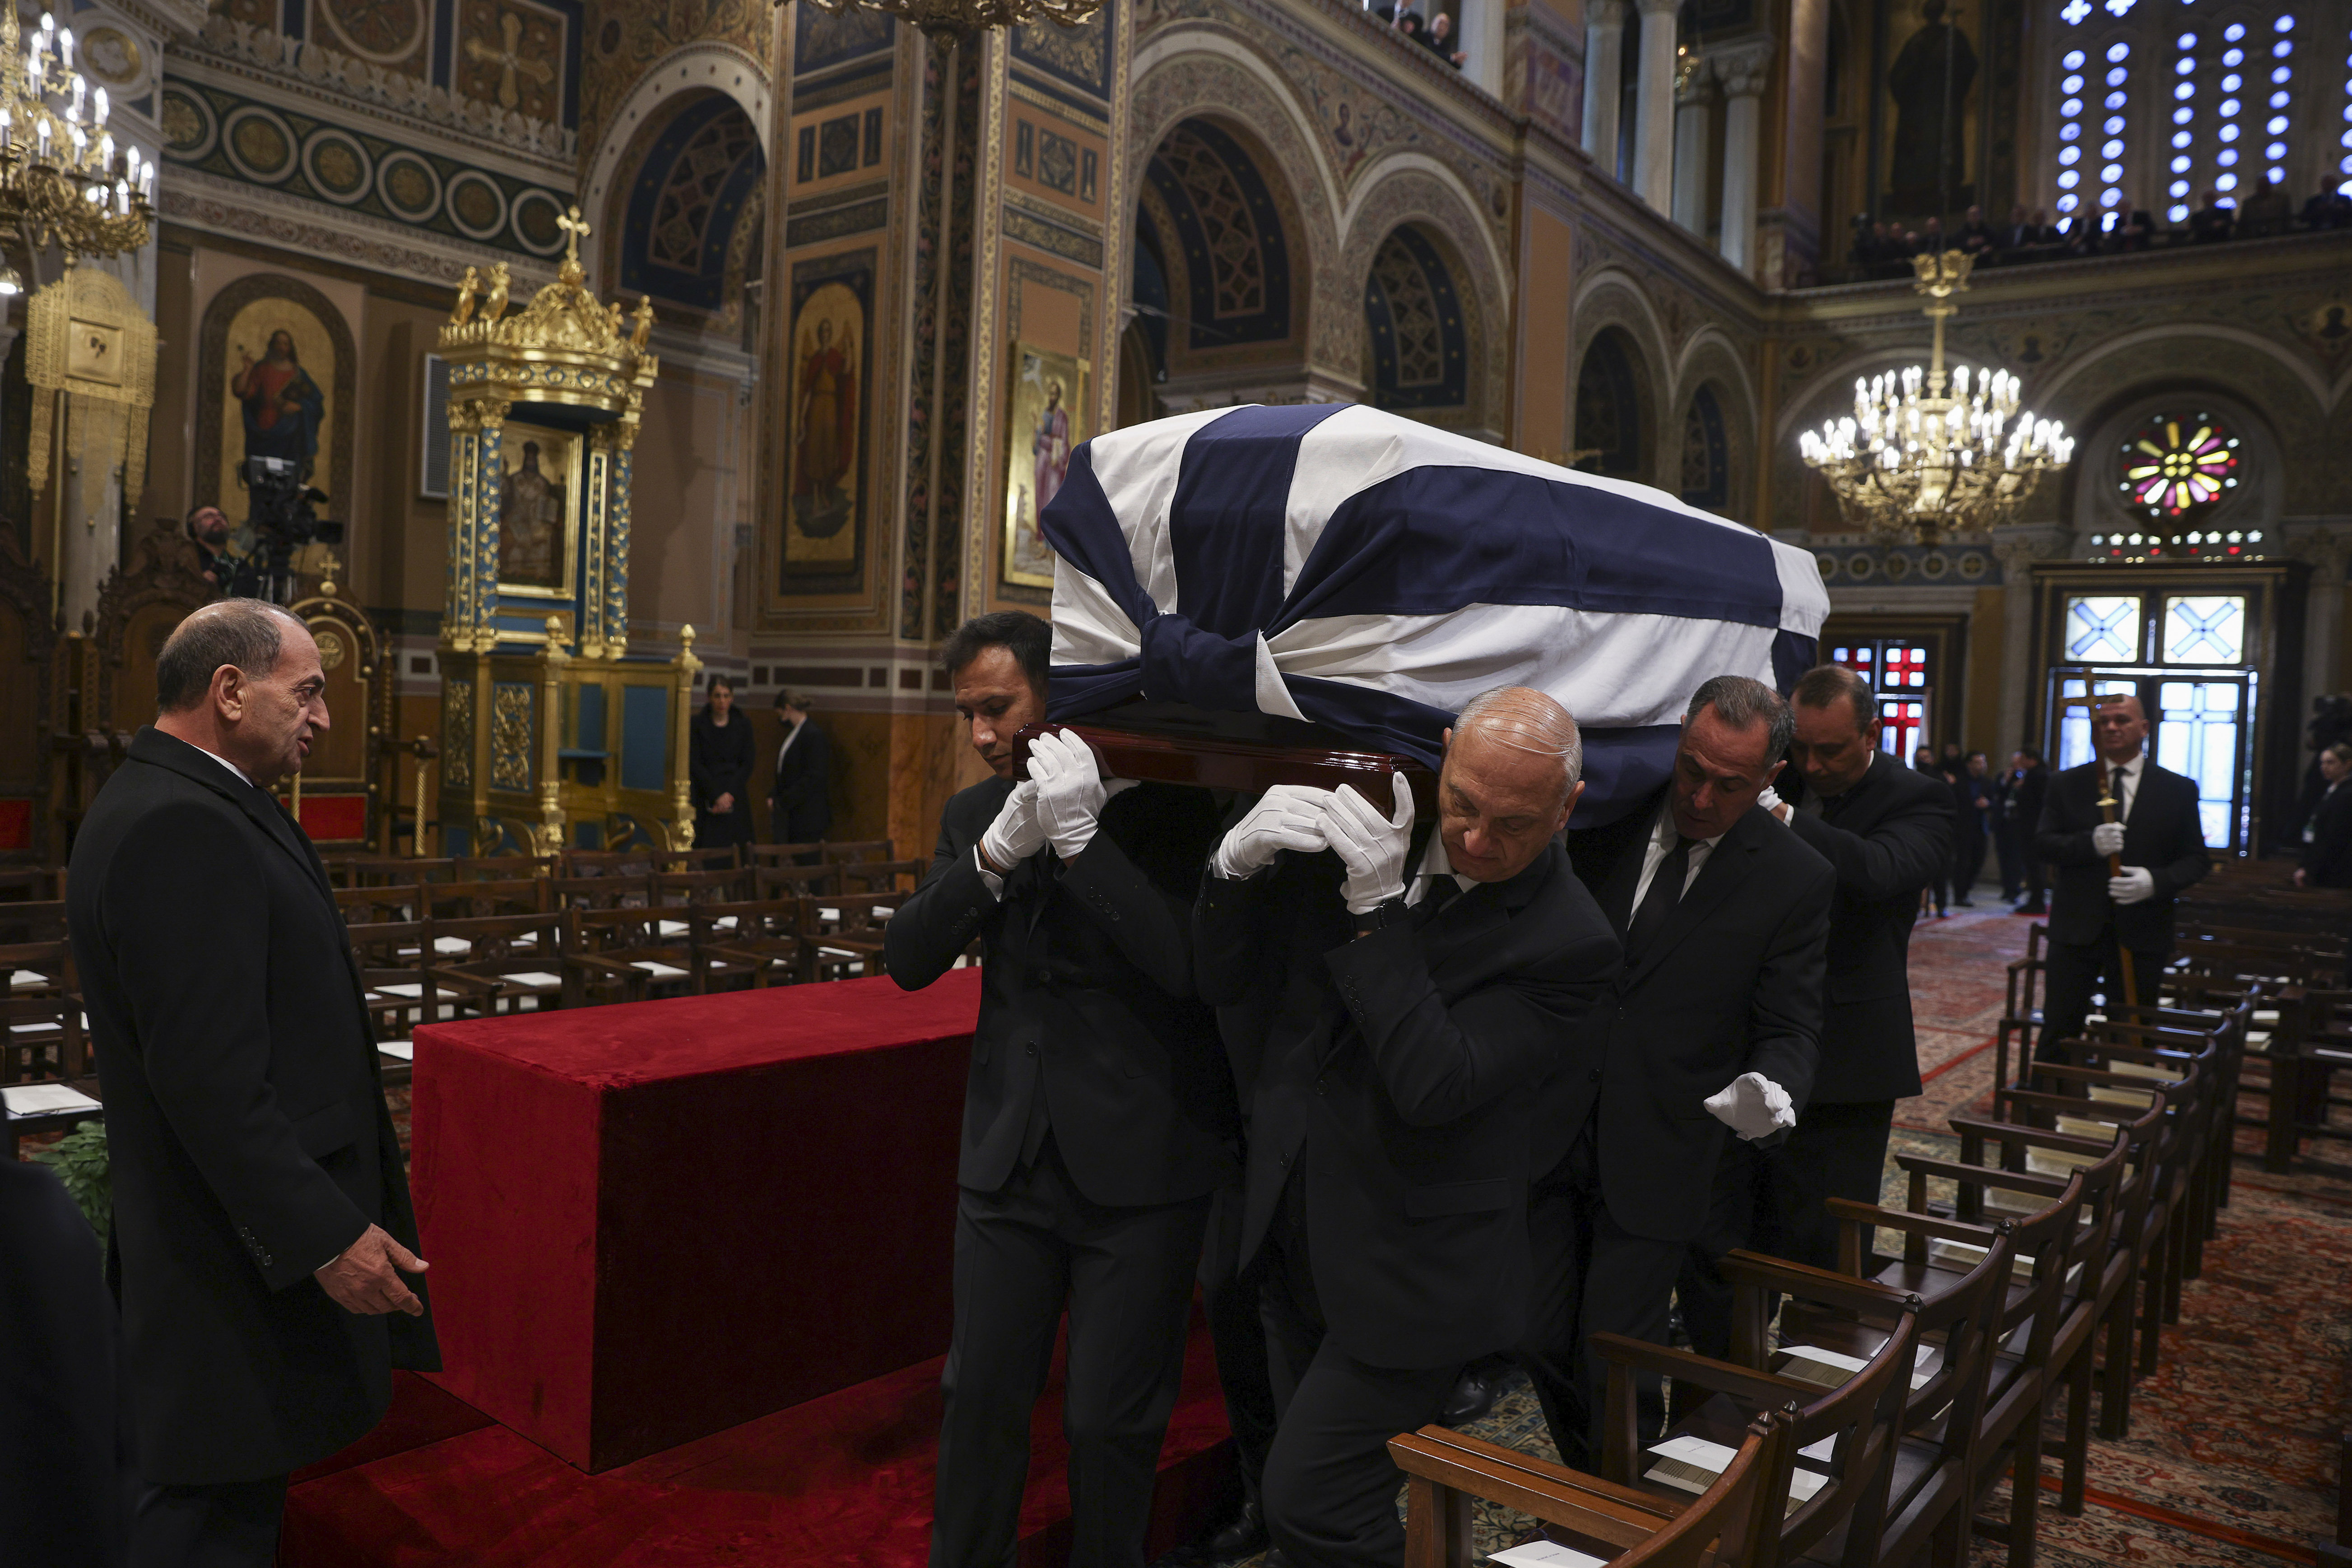  Thousands turn out to bid farewell to last king of Greece 